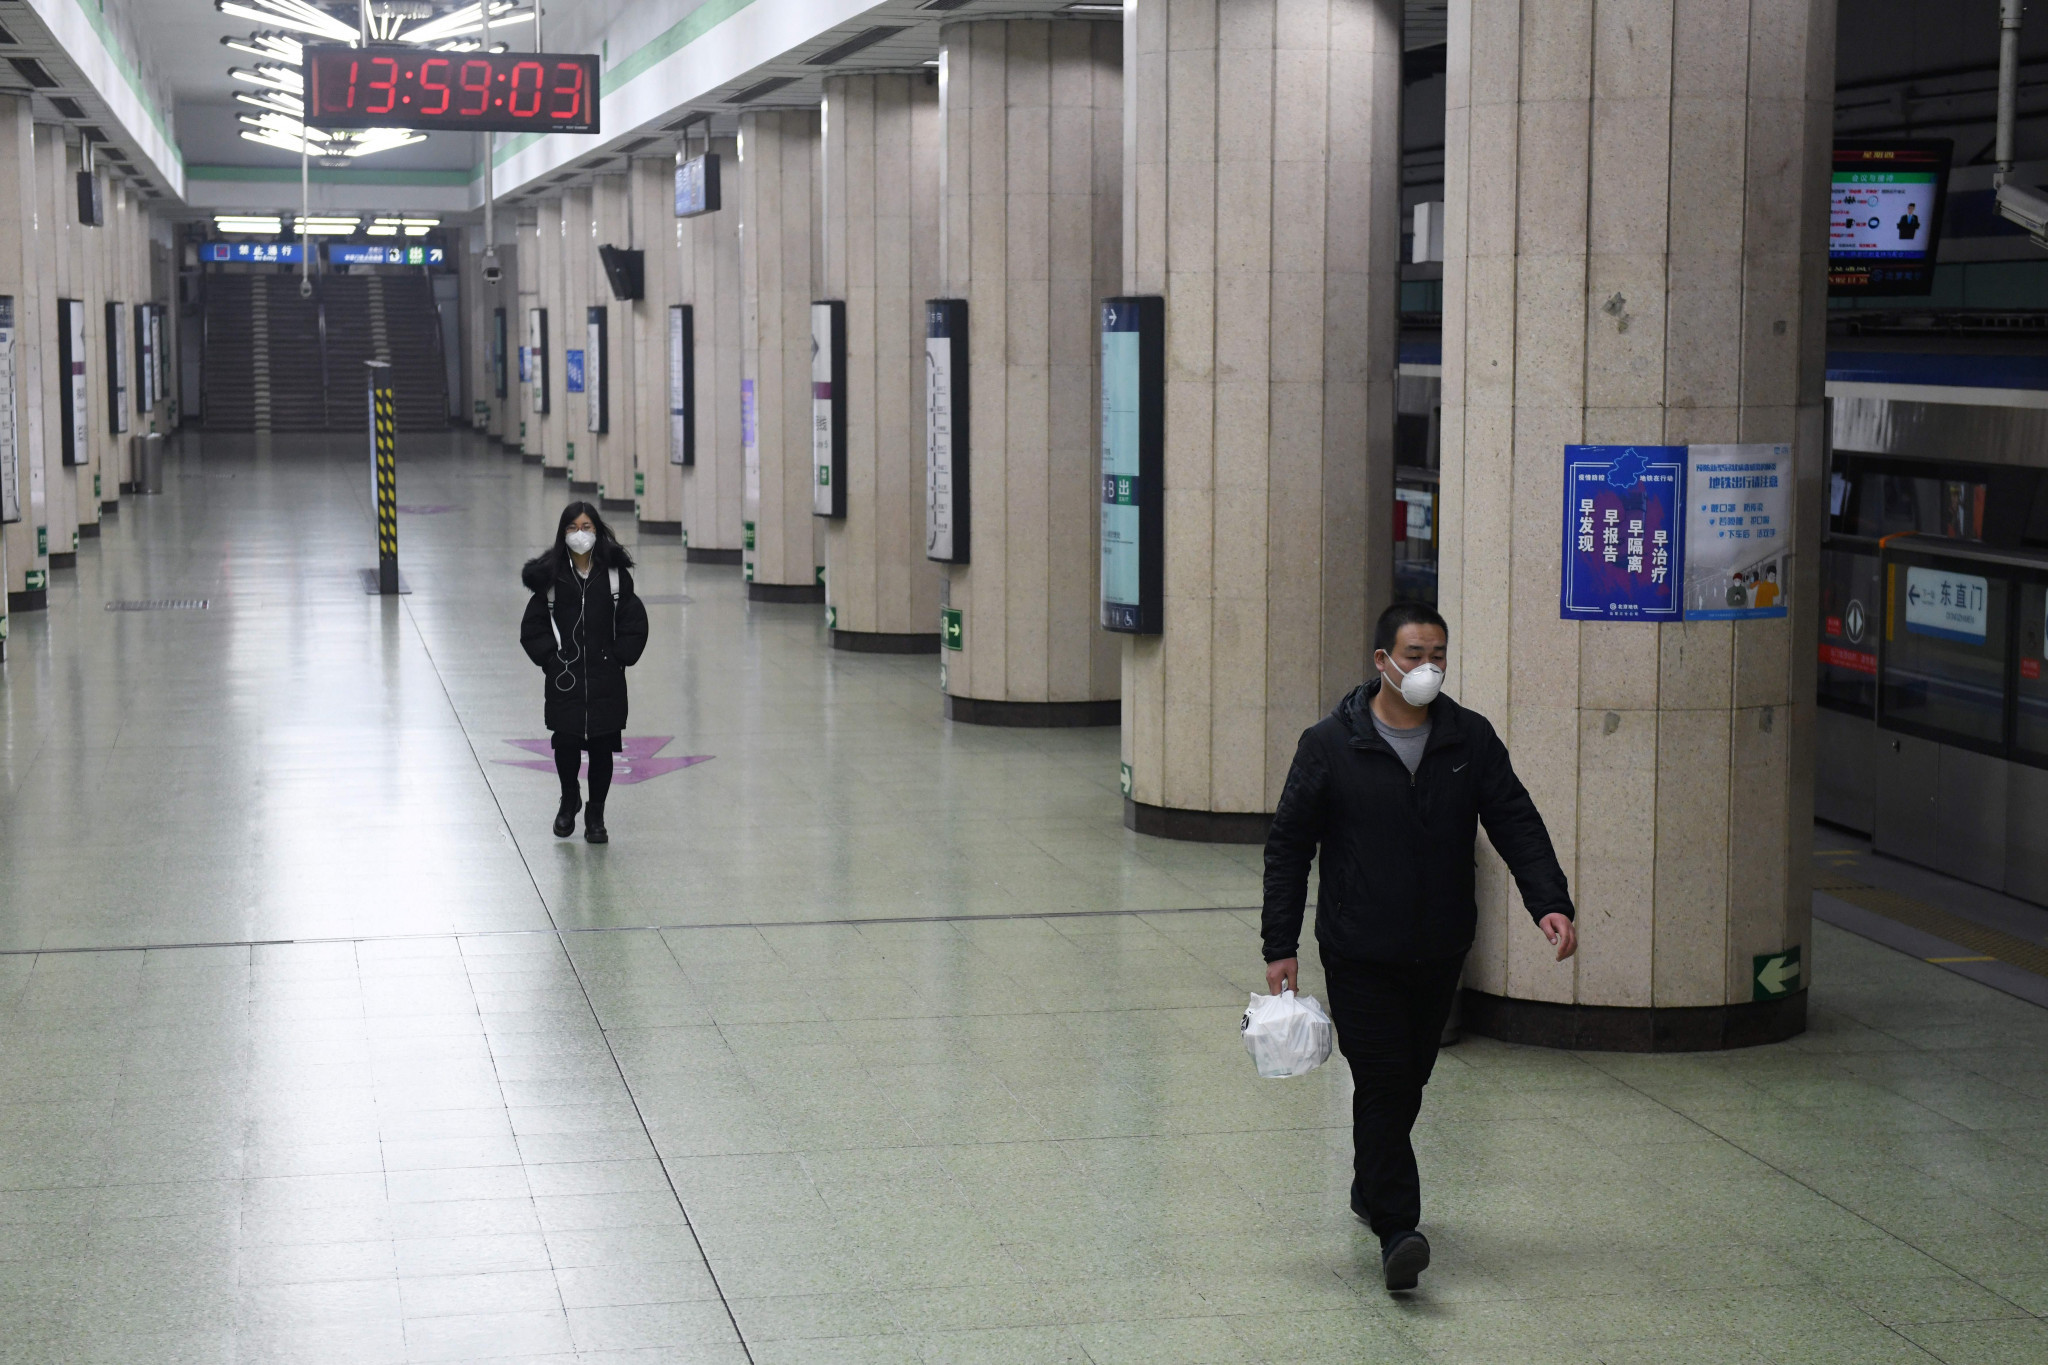 The outbreak of the virus has caused concern for Tokyo 2020 ©Getty Images